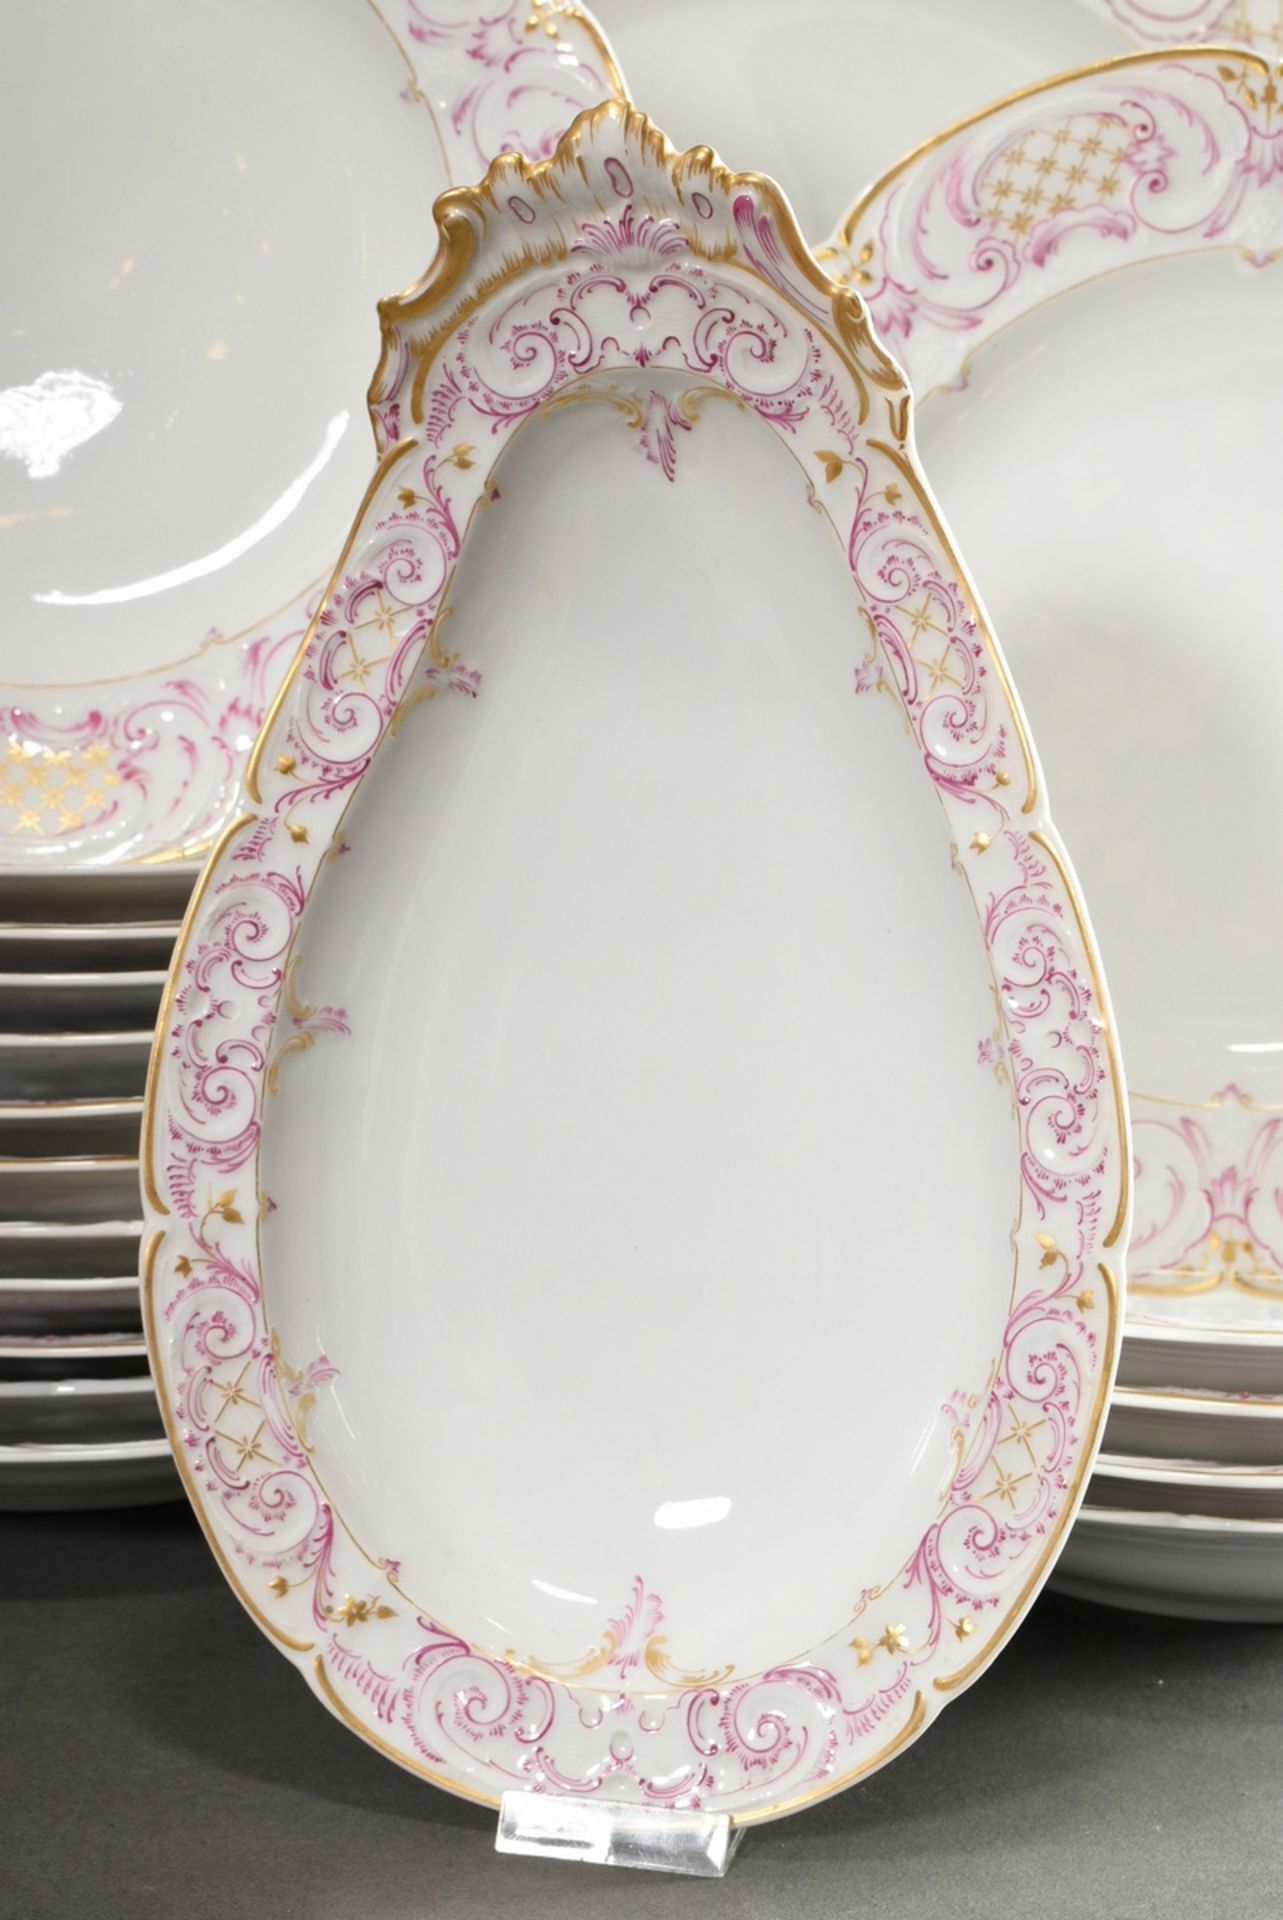 69 Pieces KPM dinner service in Rococo form with purple and gold staffage, red imperial orb mark, c - Image 18 of 22